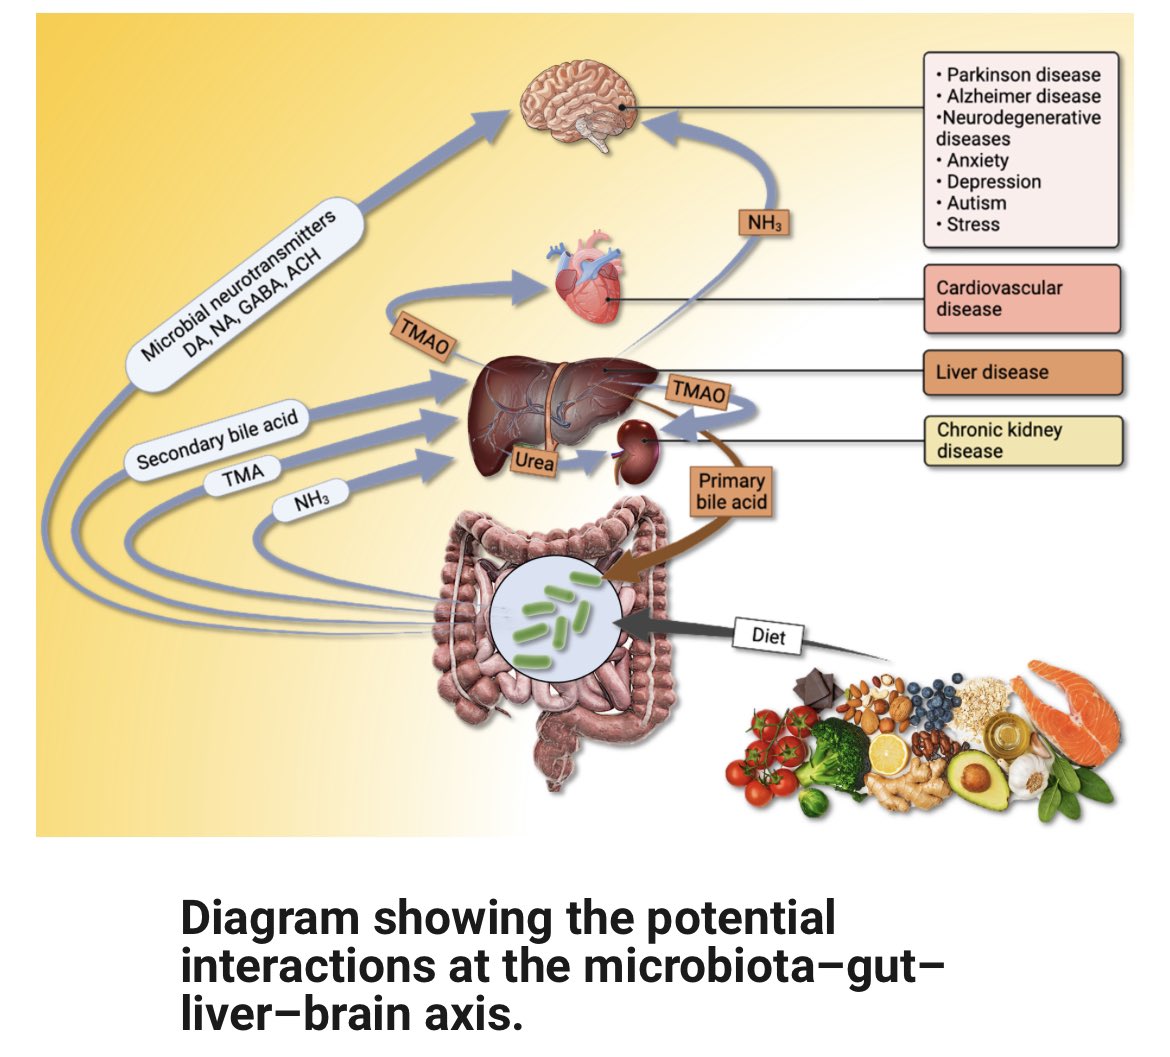 Delighted to let you know that our @LivUniCMR @LivUniBCSB @LivUniISMIB review with @Howbeer @WinderCate @rickdunnblade on #metabolomics and #microbiome #SynBio has just been published #OpenAccess in @Biochem_Journal portlandpress.com/biochemj/artic…